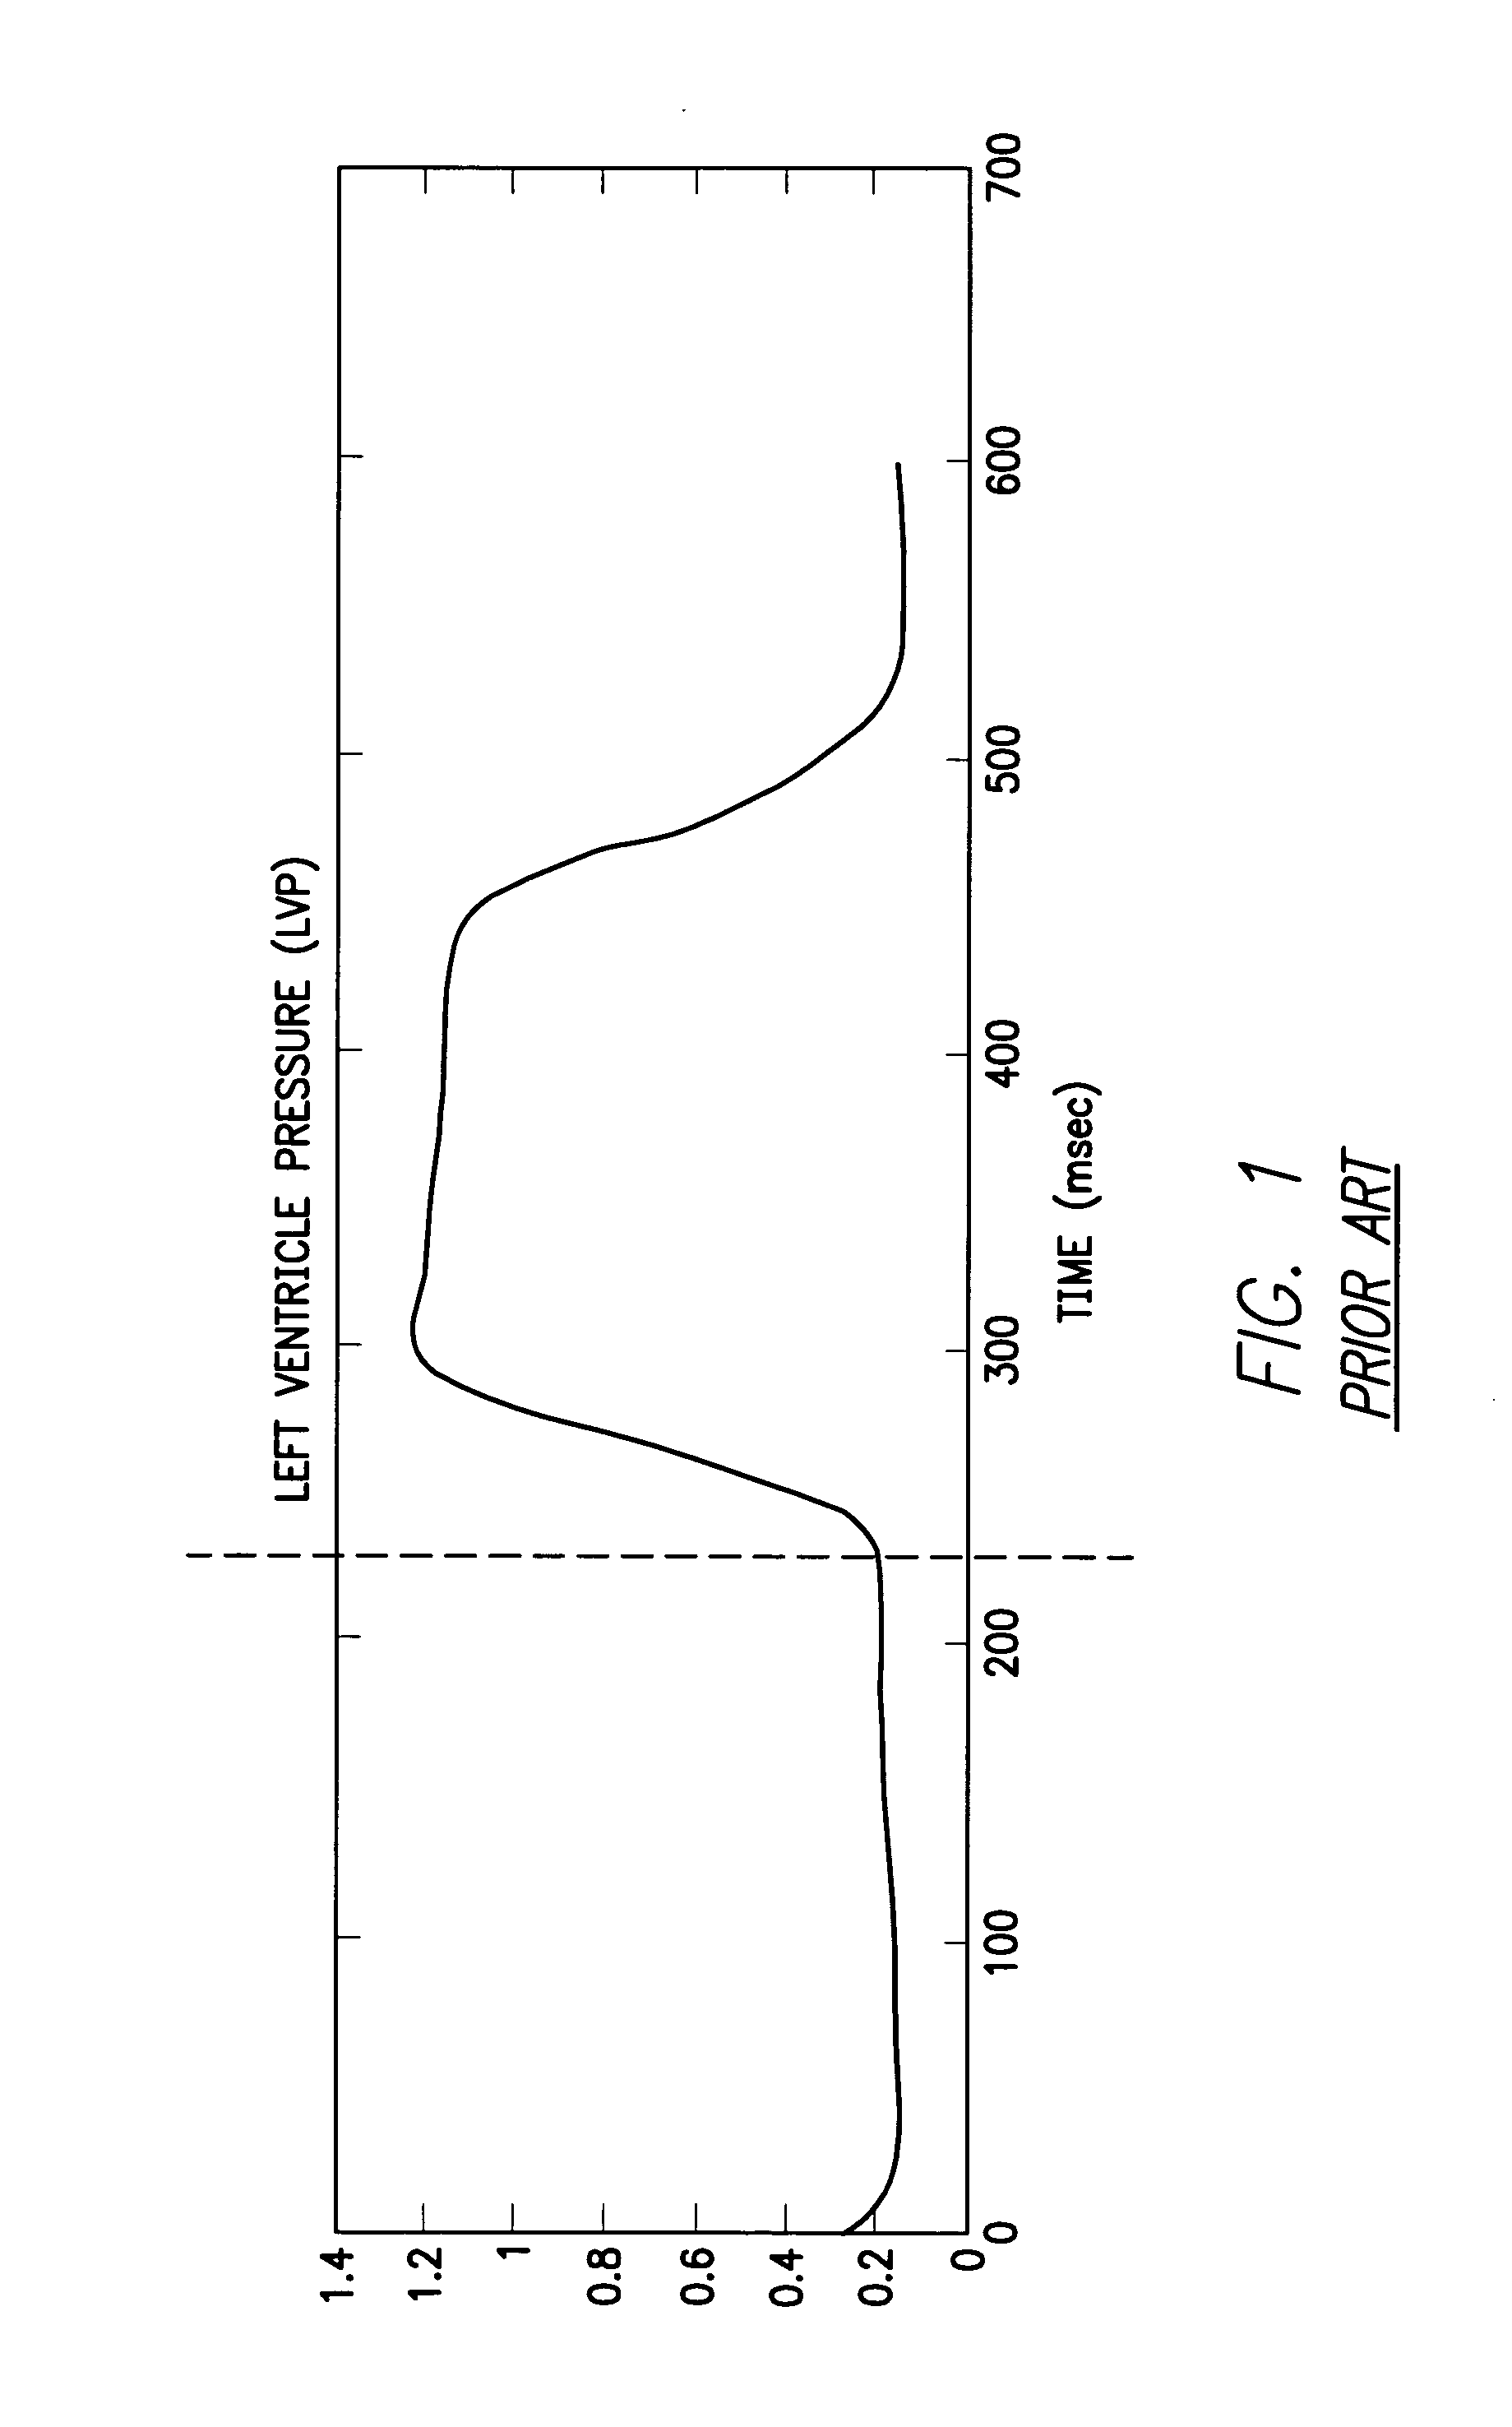 System and method for detecting heart failure and pulmonary edema based on ventricular end-diastolic pressure using an implantable medical device